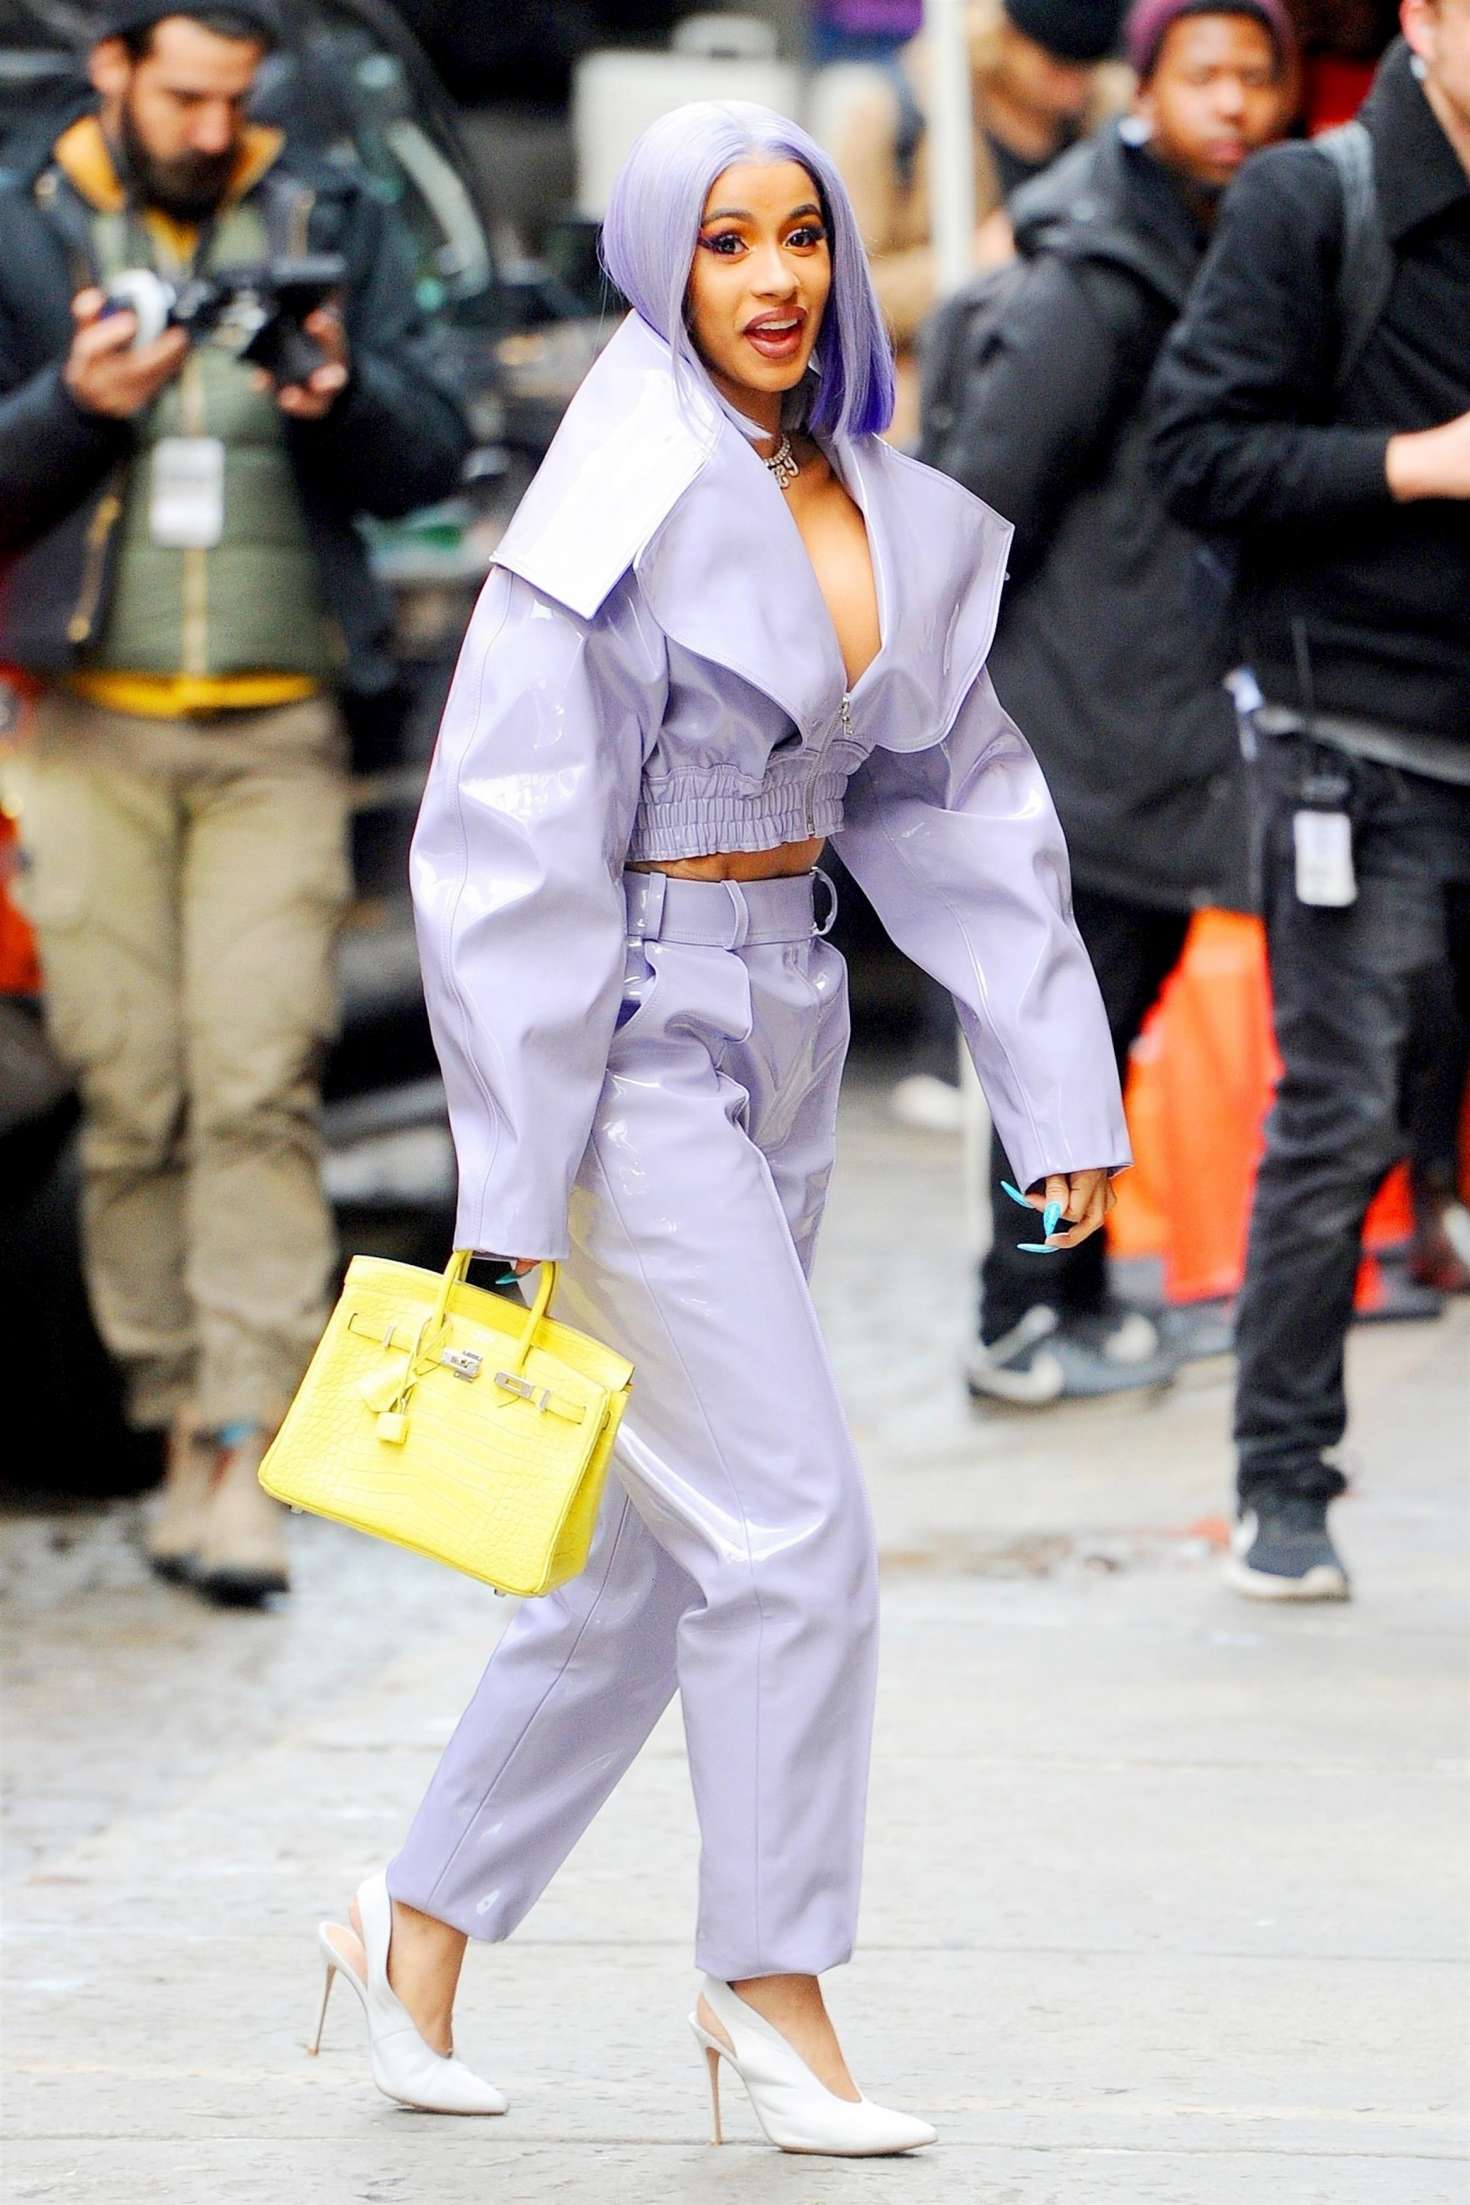 Cardi B in Purple Outfit - Out in NYC. 